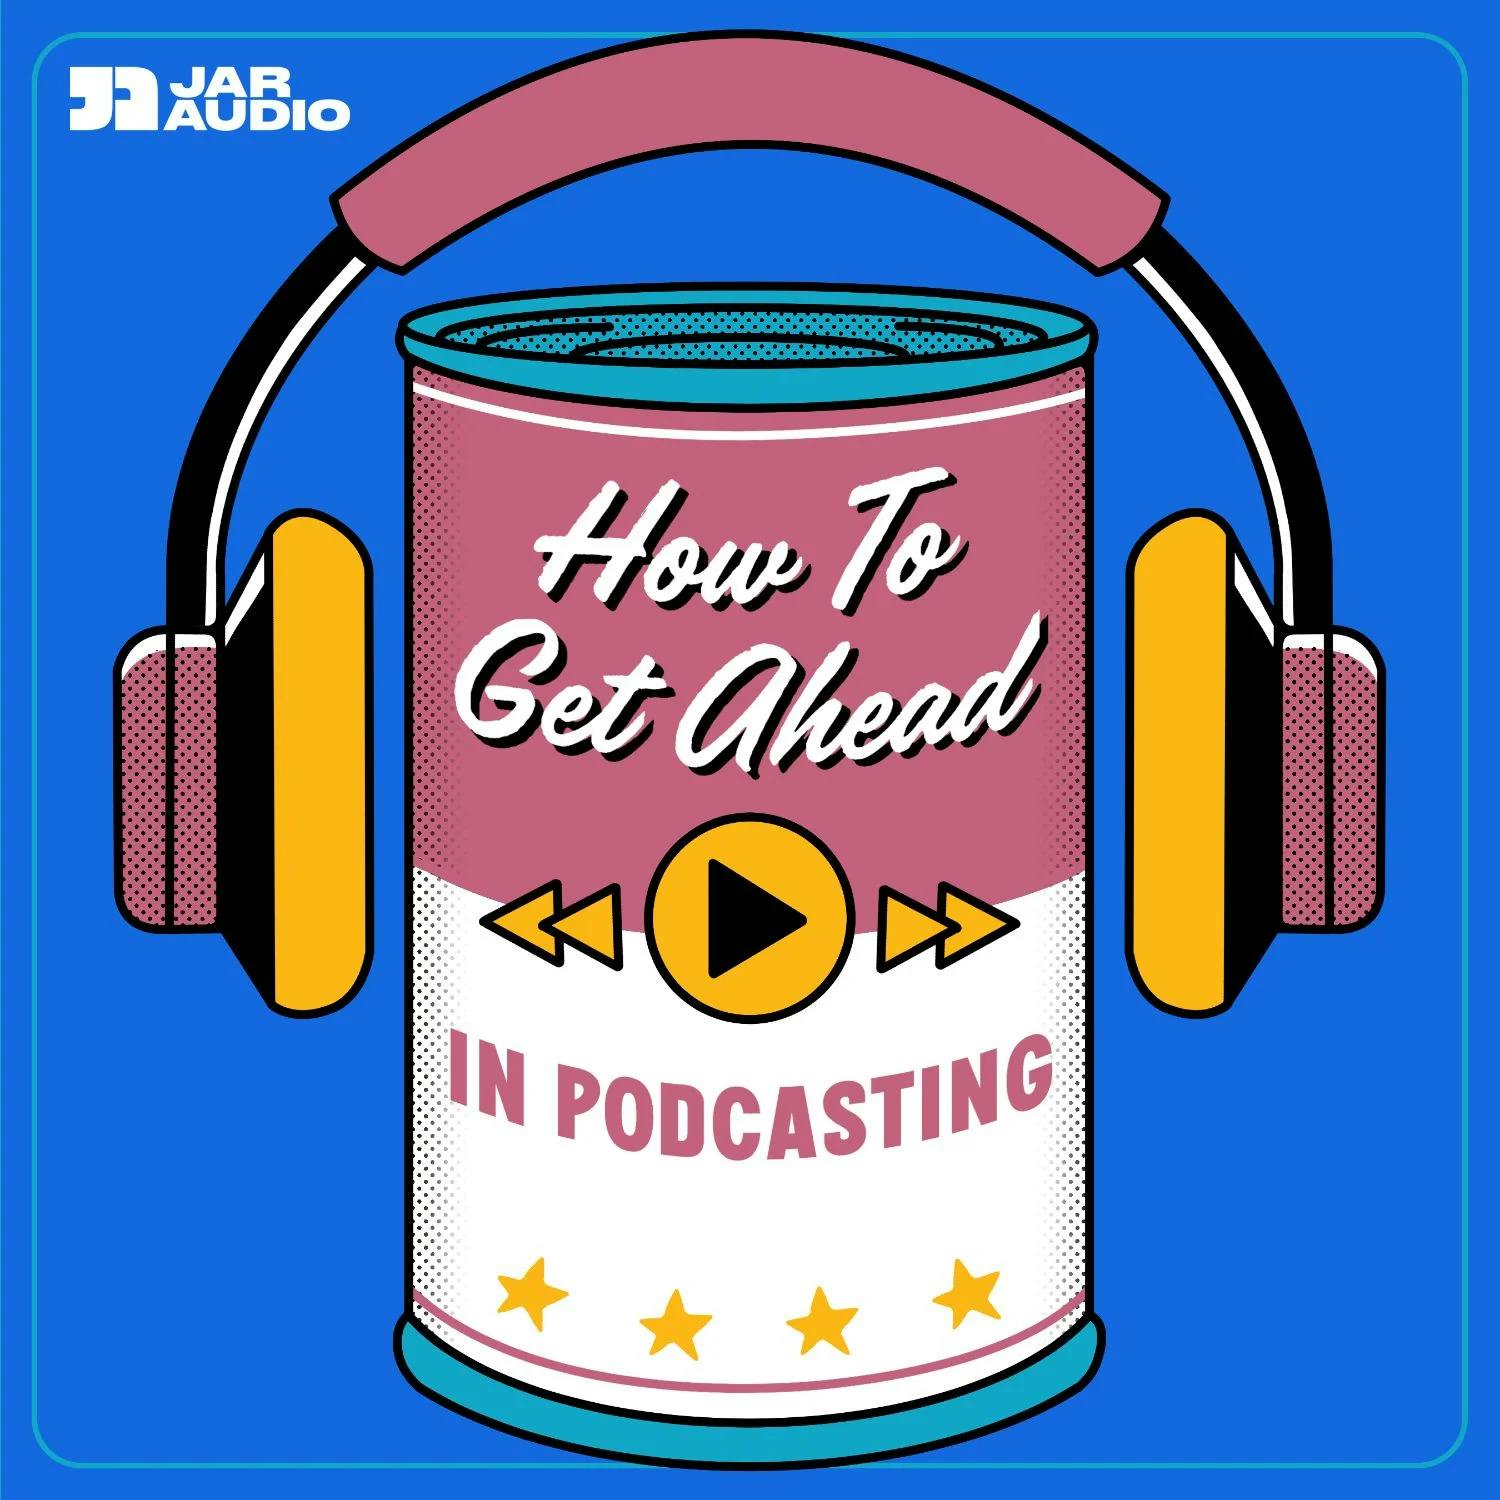 Review: How To Get Ahead In Podcasting from JAR Audio